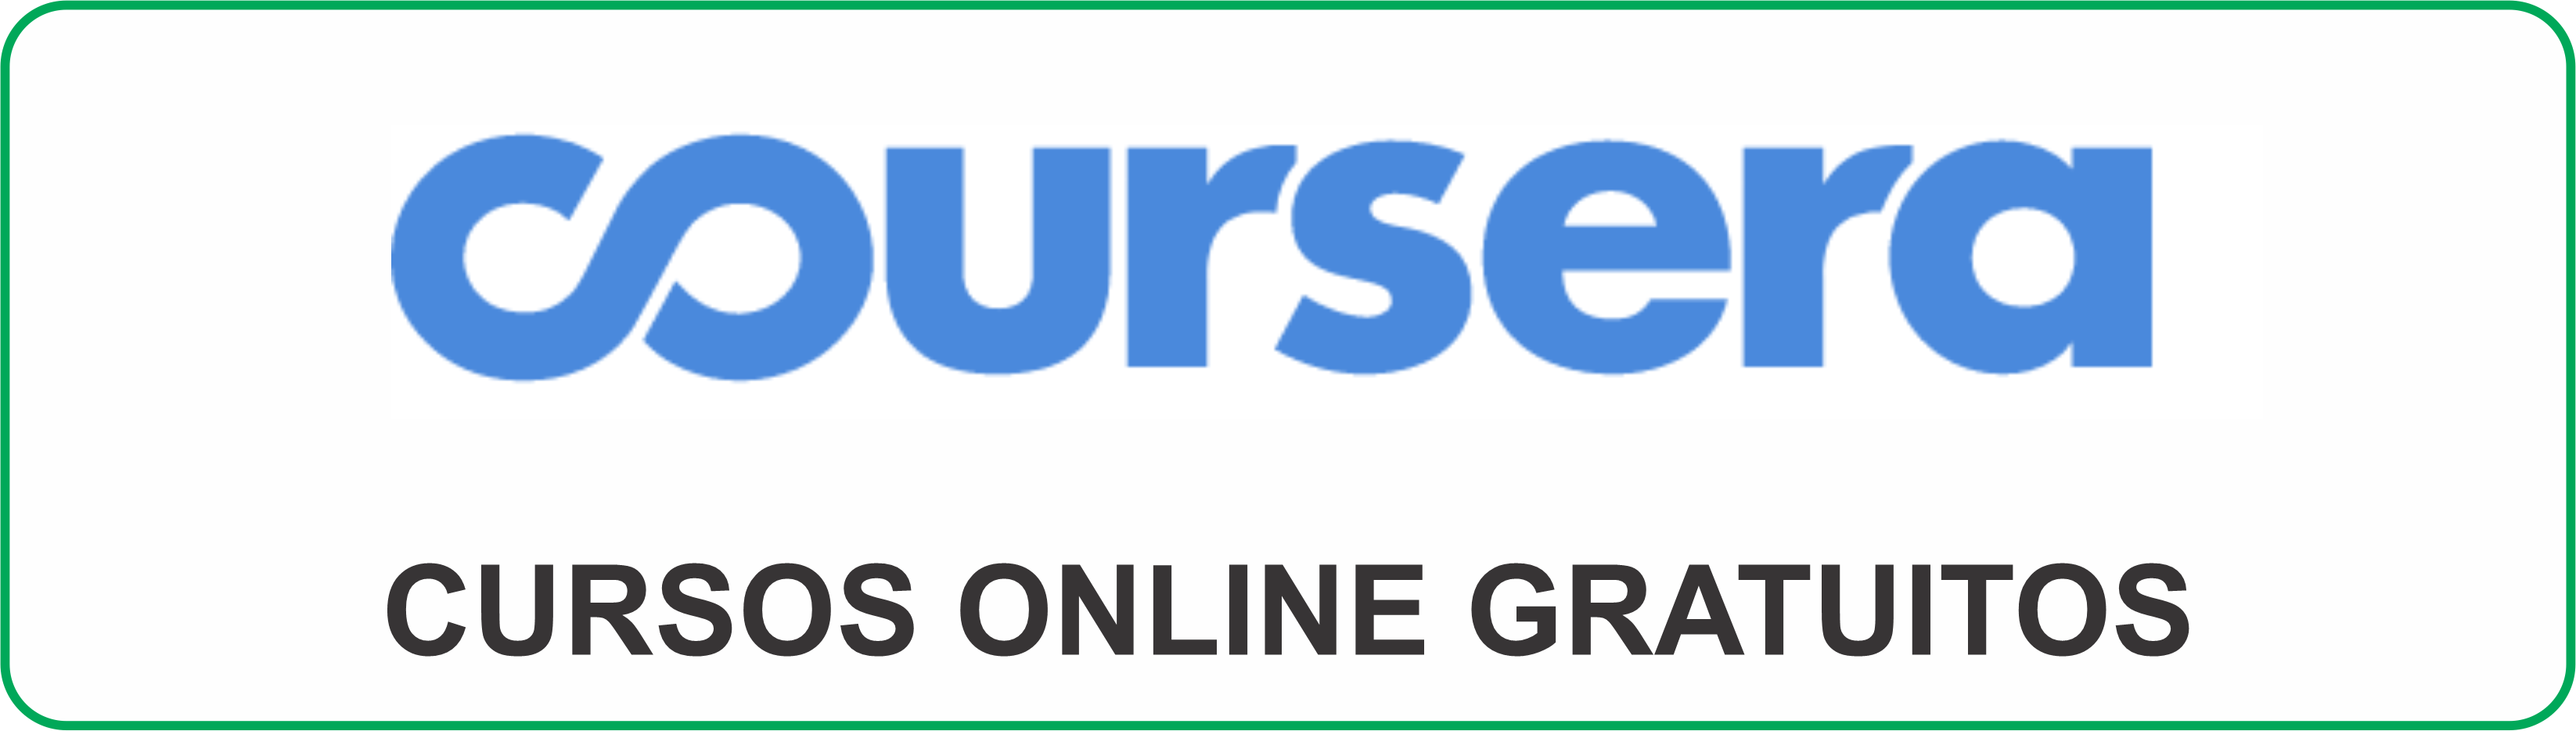 COURSERA.png